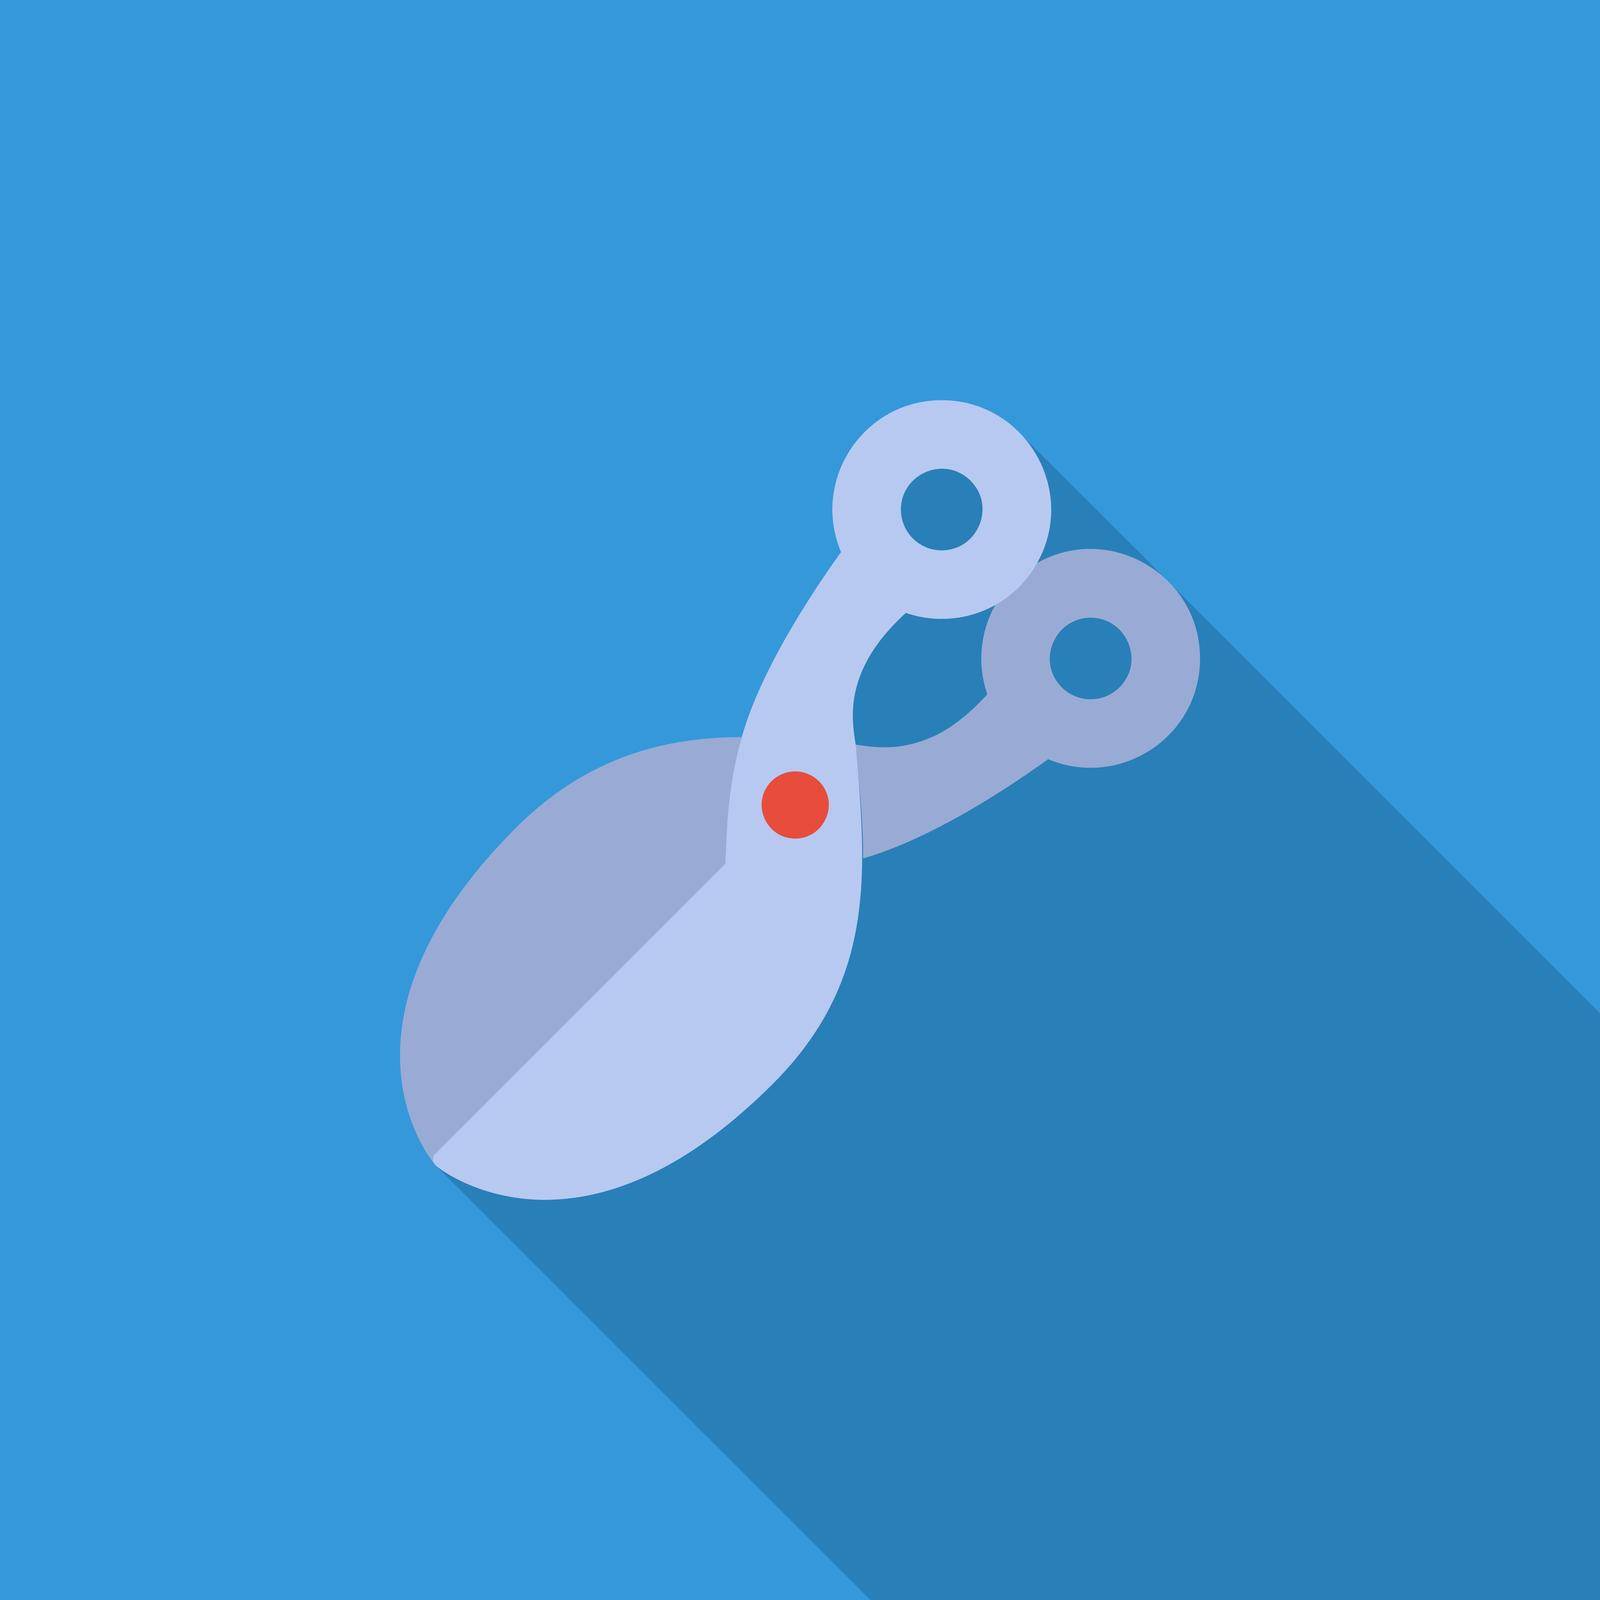 Scissors icon. Flat vector related icon for web and mobile applications. It can be used as - logo, pictogram, icon, infographic element. Vector Illustration.